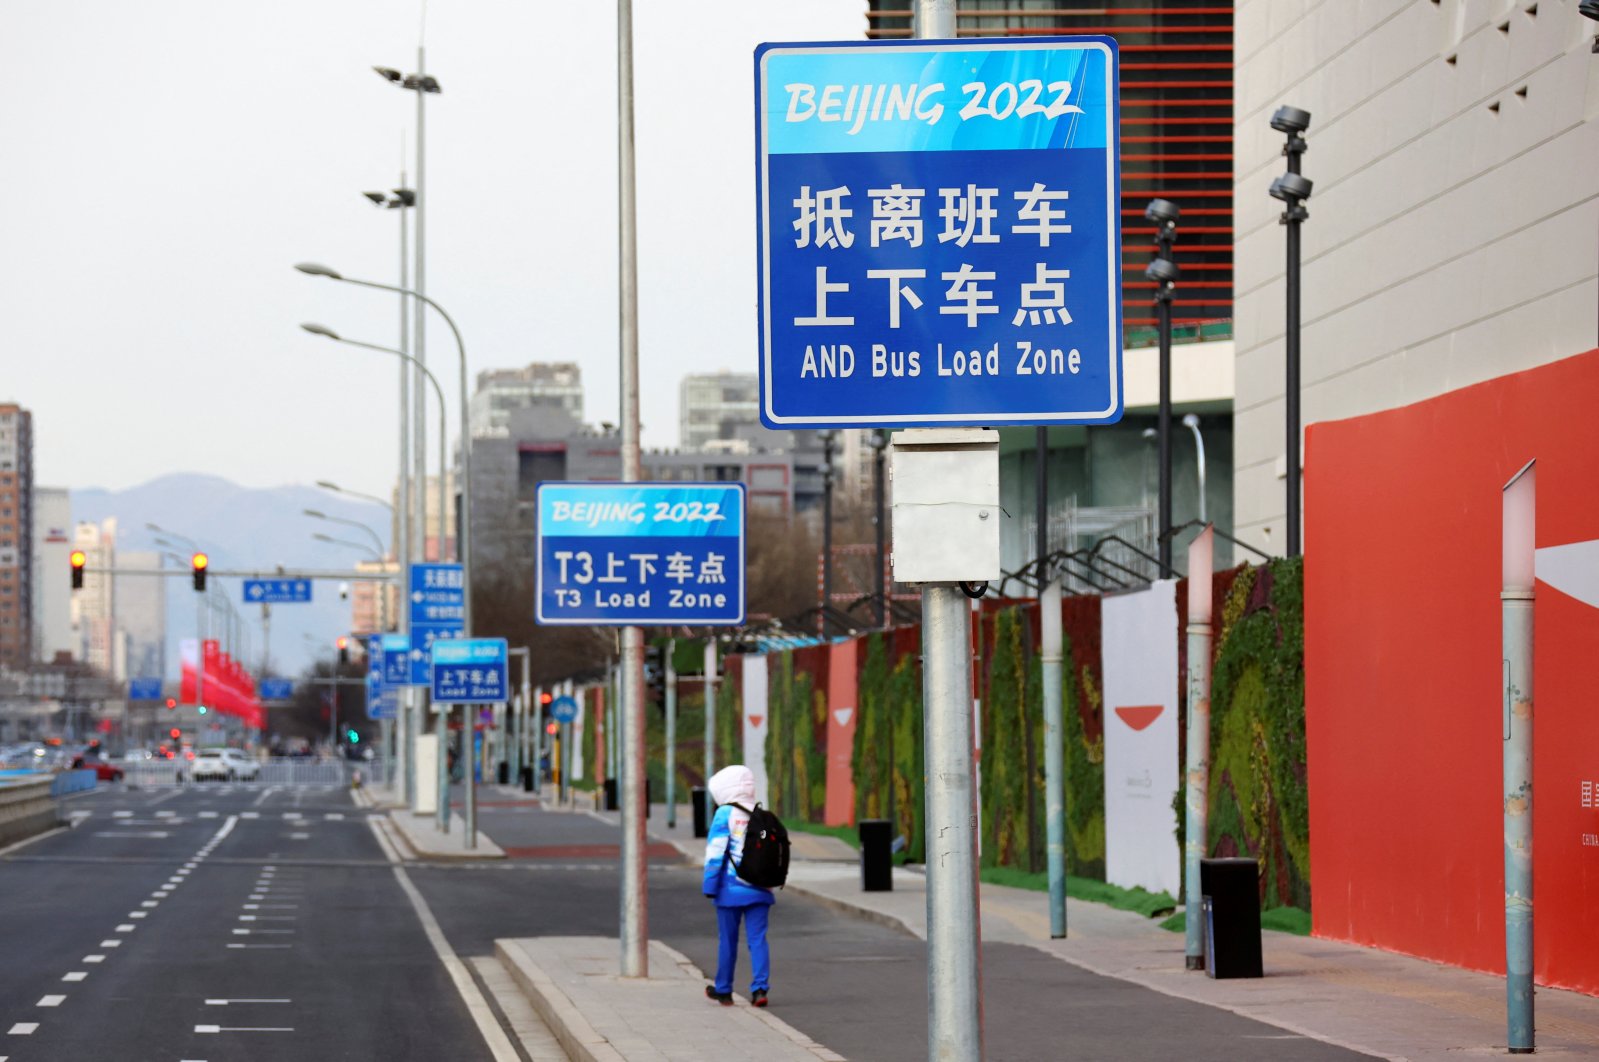 A volunteer walks outside the Main Press Center ahead of the Beijing 2022 Winter Olympics, China, Jan. 11, 2022. (Reuters Photo)